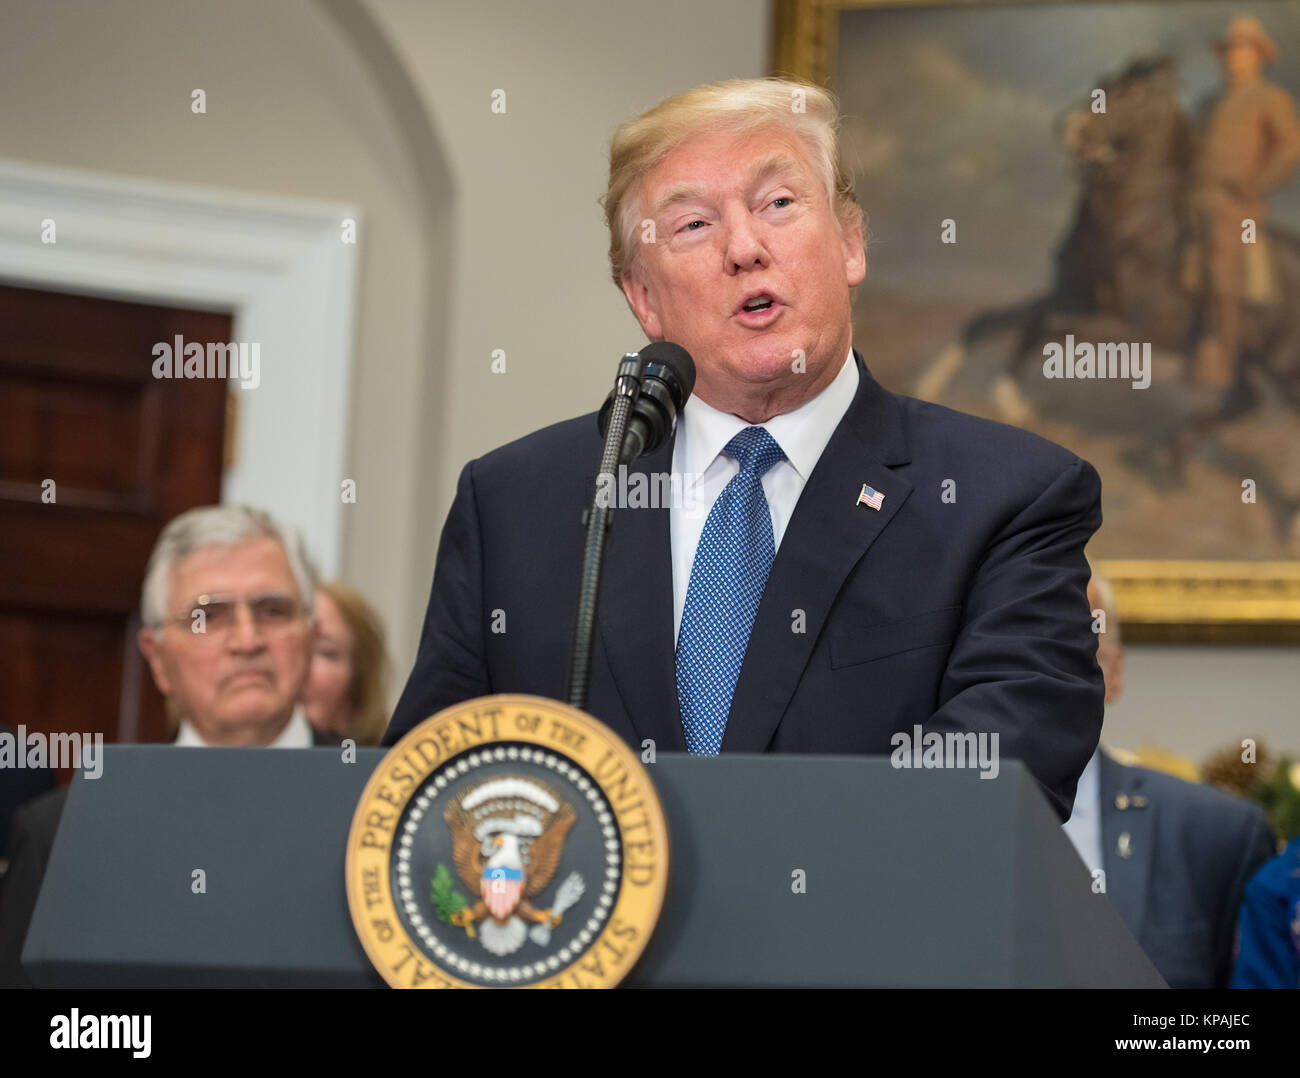 United States President Donald J. Trump speaks before signing the Presidential Space Directive - 1, directing NASA to return to the moon, in the Roosevelt Room of the White House in Washington, Monday, December 11, 2017. Mandatory Credit: Aubrey Gemignani / NASA via CNP       - NO WIRE SERVICE - Photo: Aubrey Gemignani/Consolidated/dpa Stock Photo